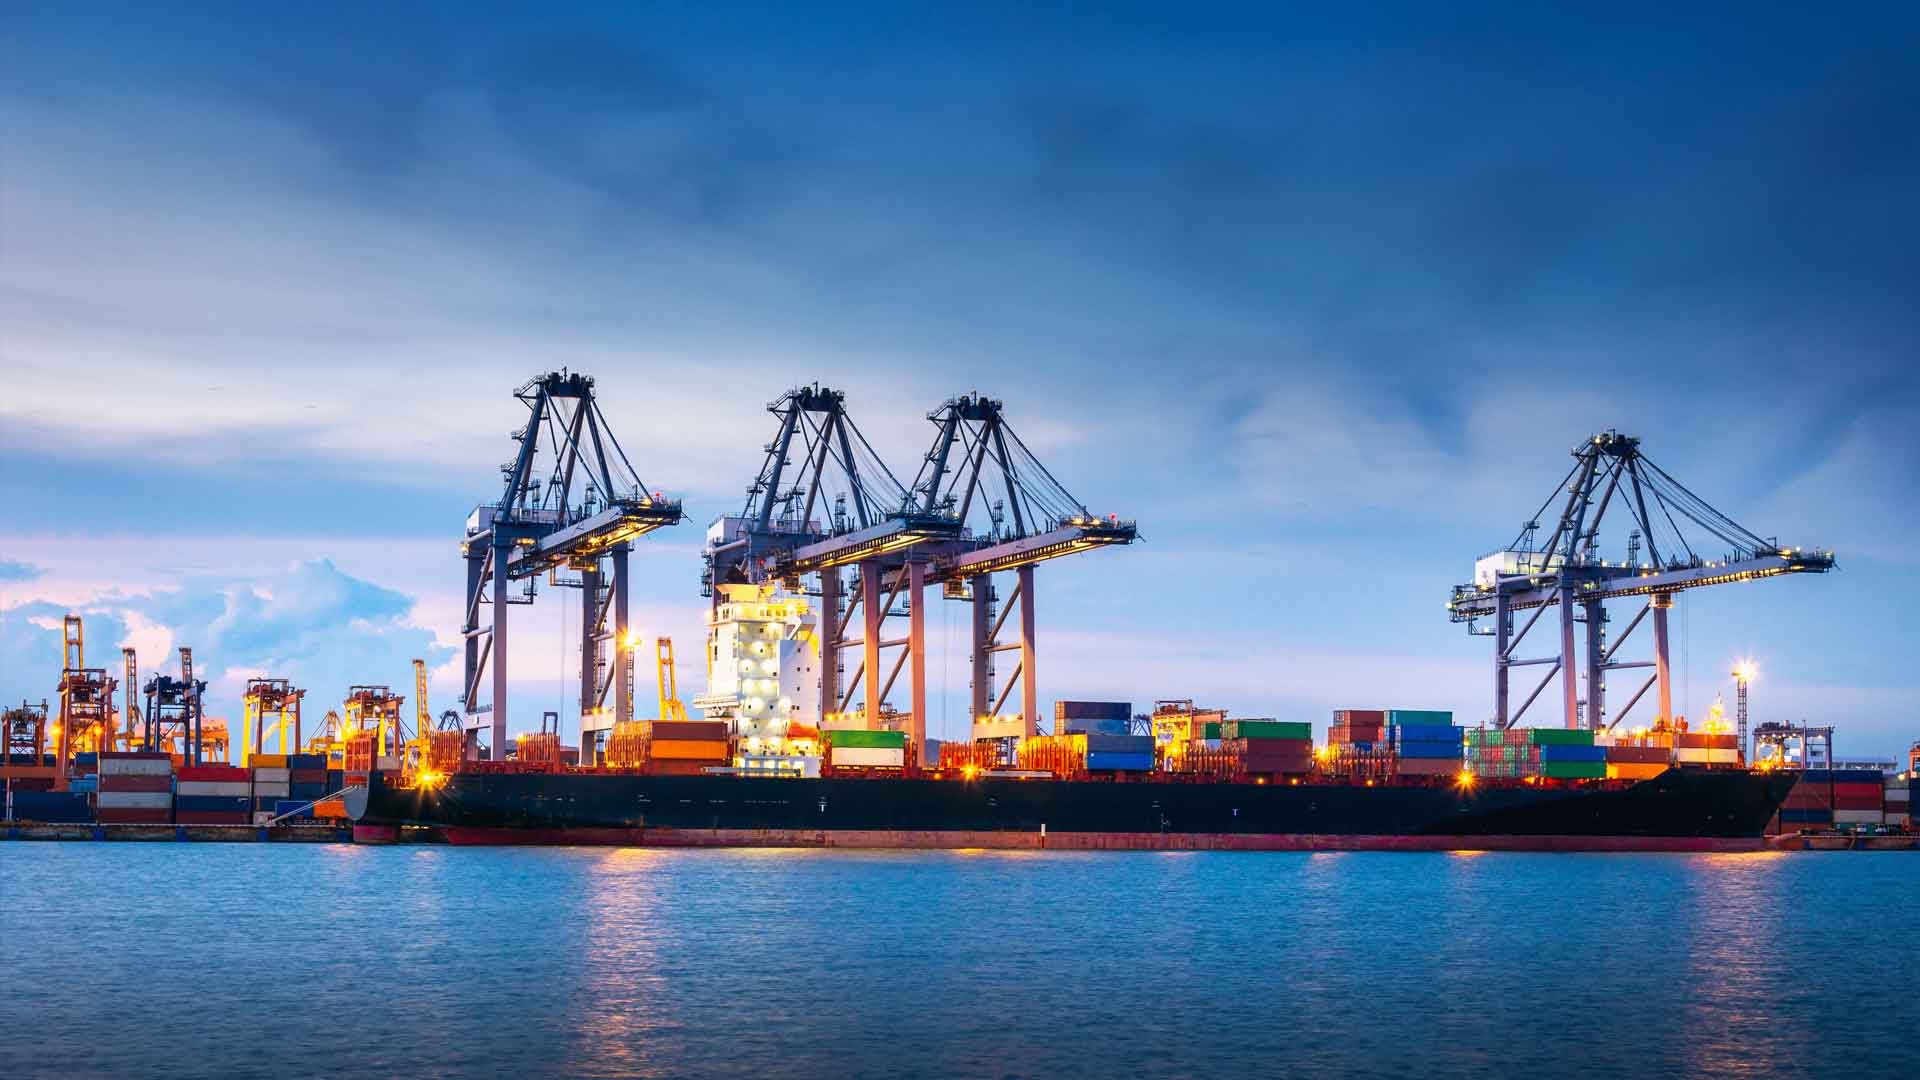 We need stronger measures for maritime cyber security in ports and terminals